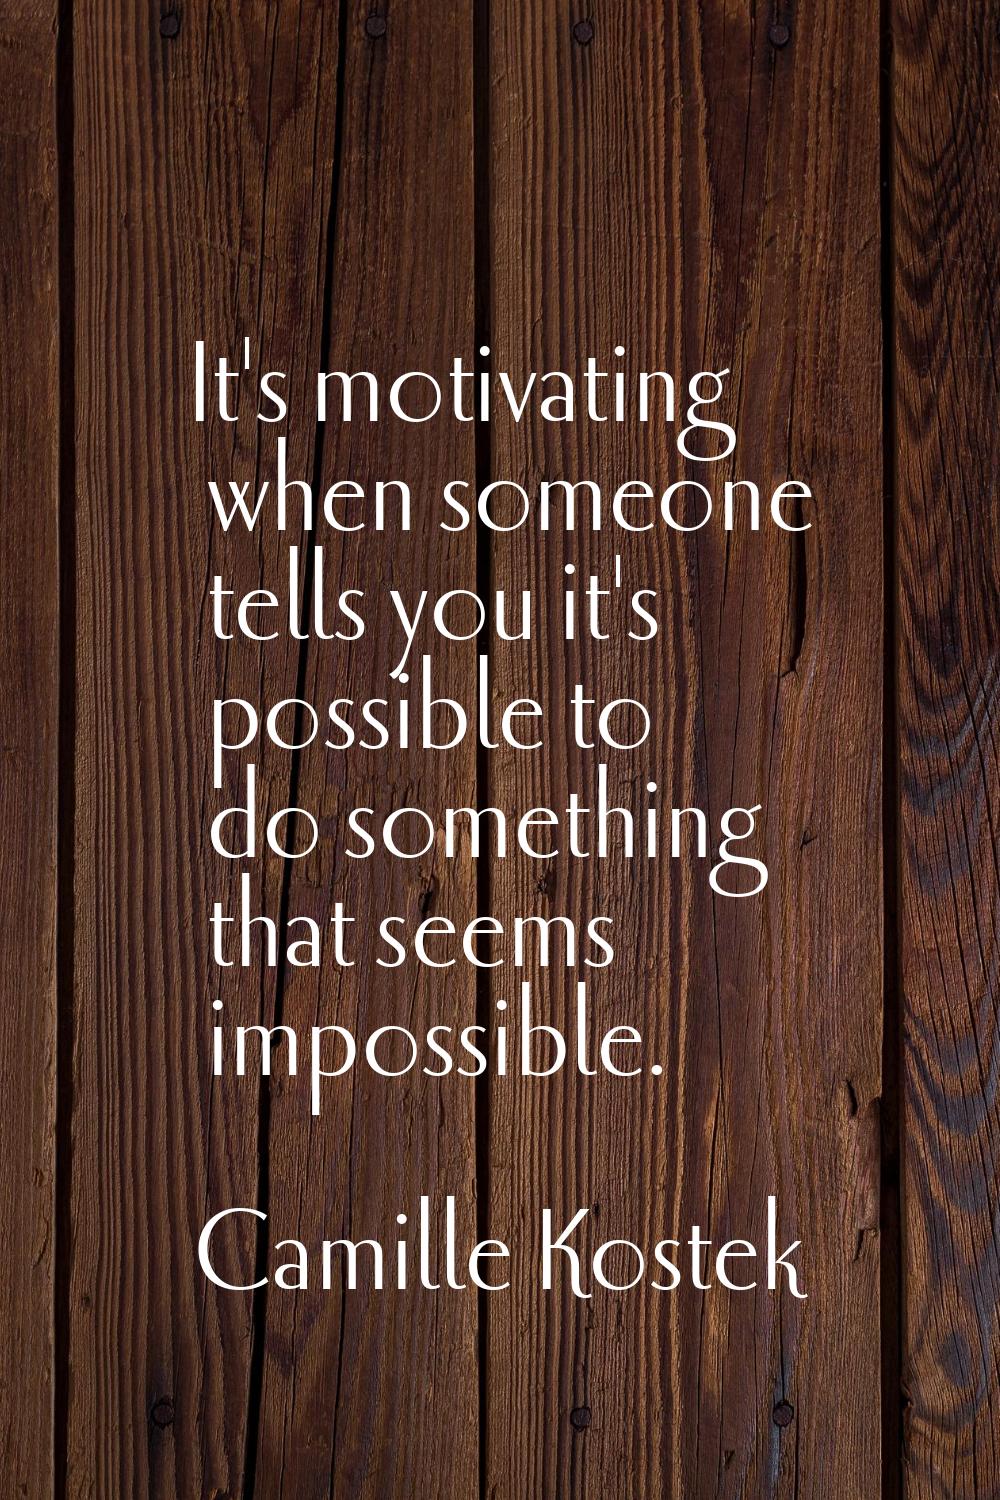 It's motivating when someone tells you it's possible to do something that seems impossible.